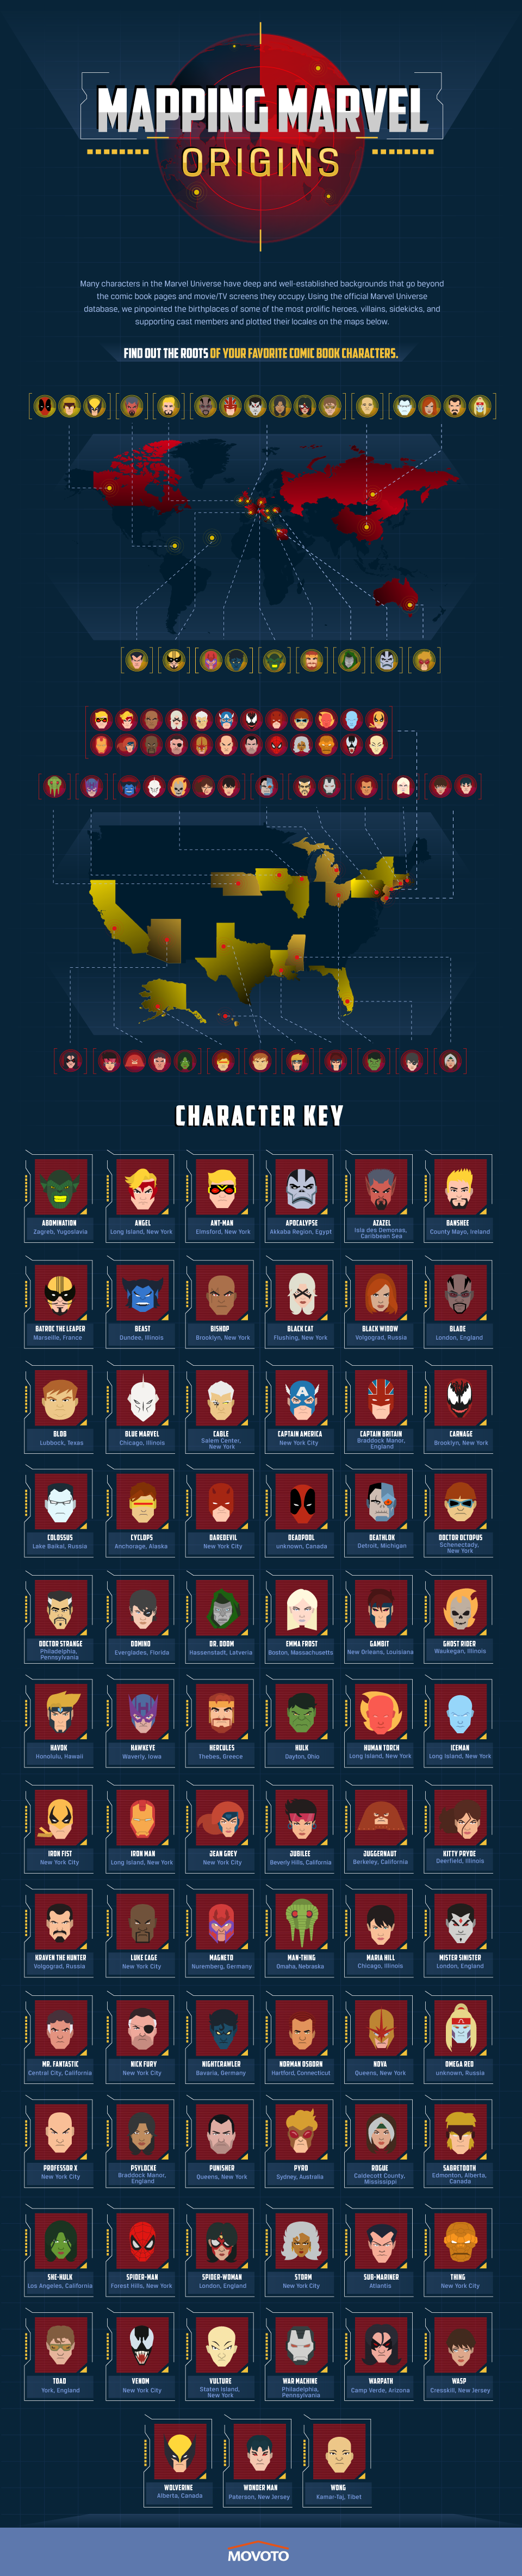 This Map Shows Where The Most Famous Marvel Characters Are From